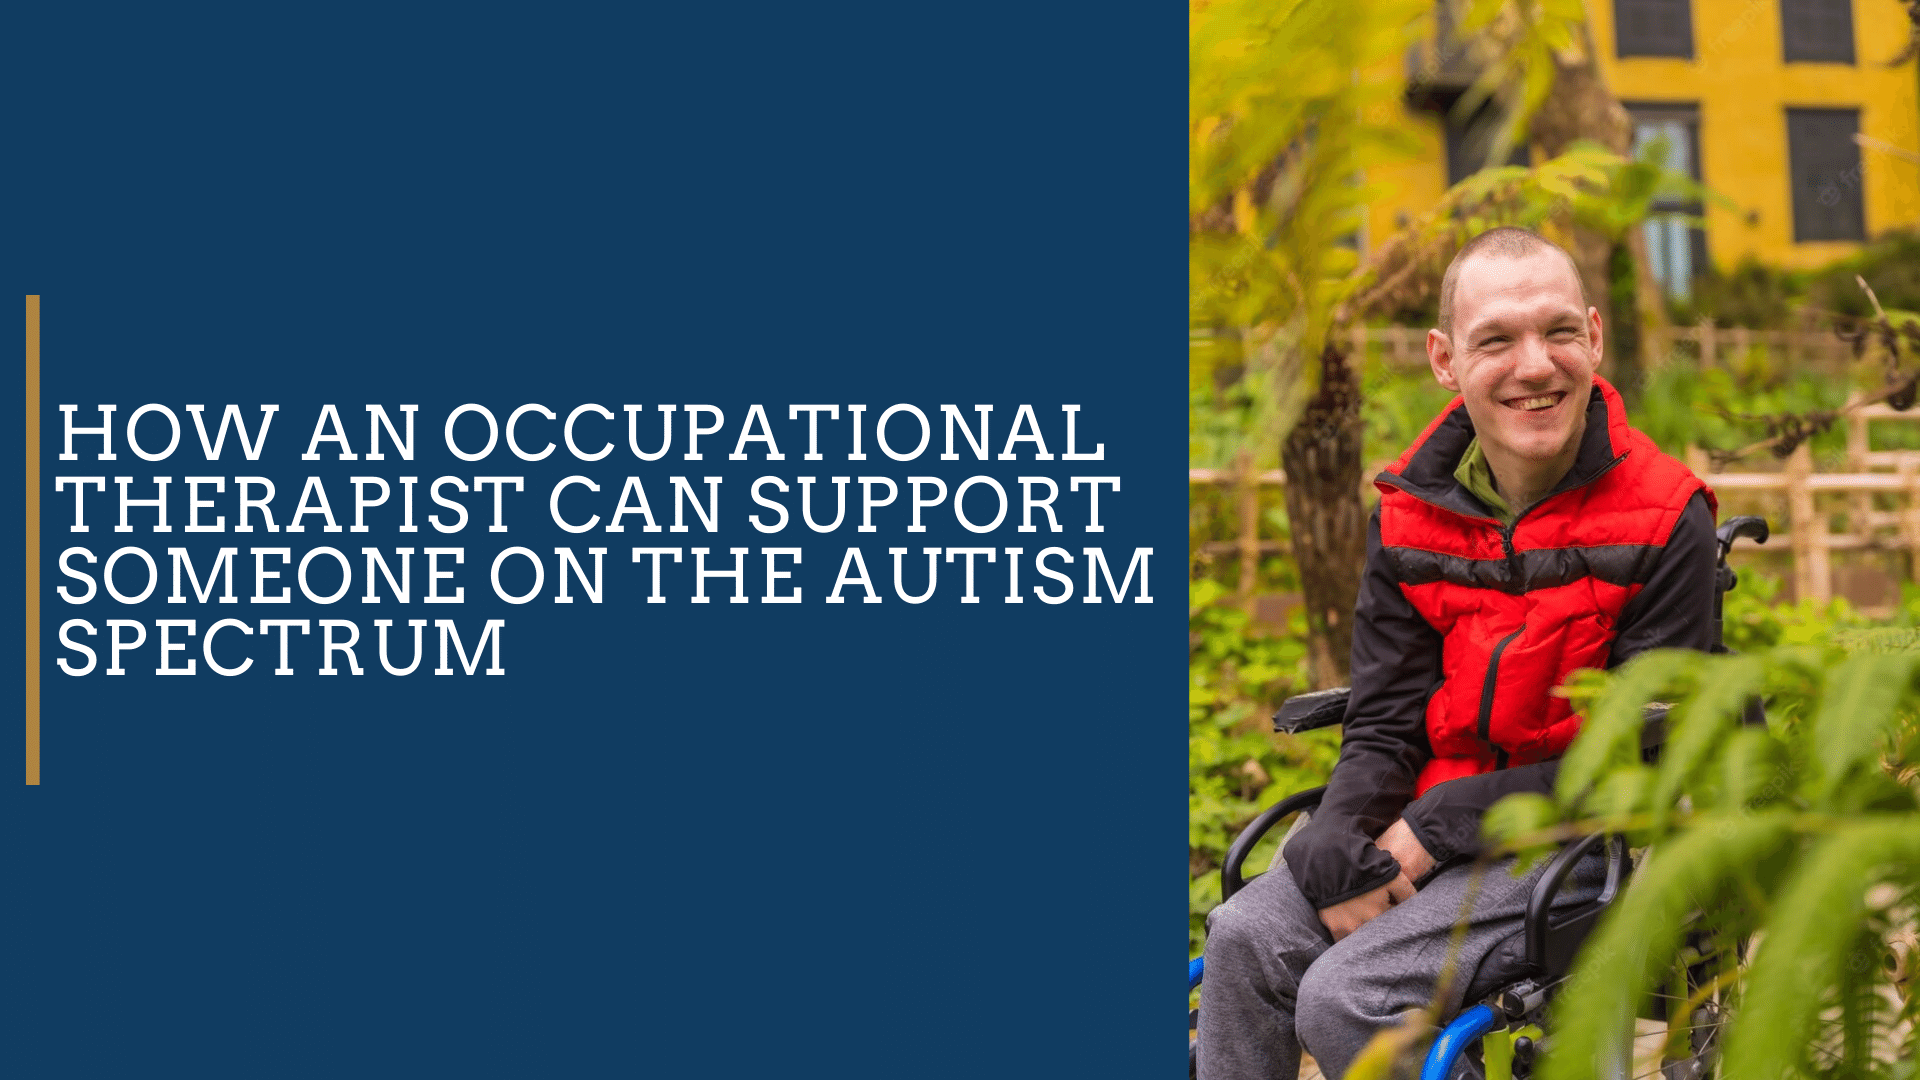 How an Occupational Therapist Can Support Someone on the Autism Spectrum